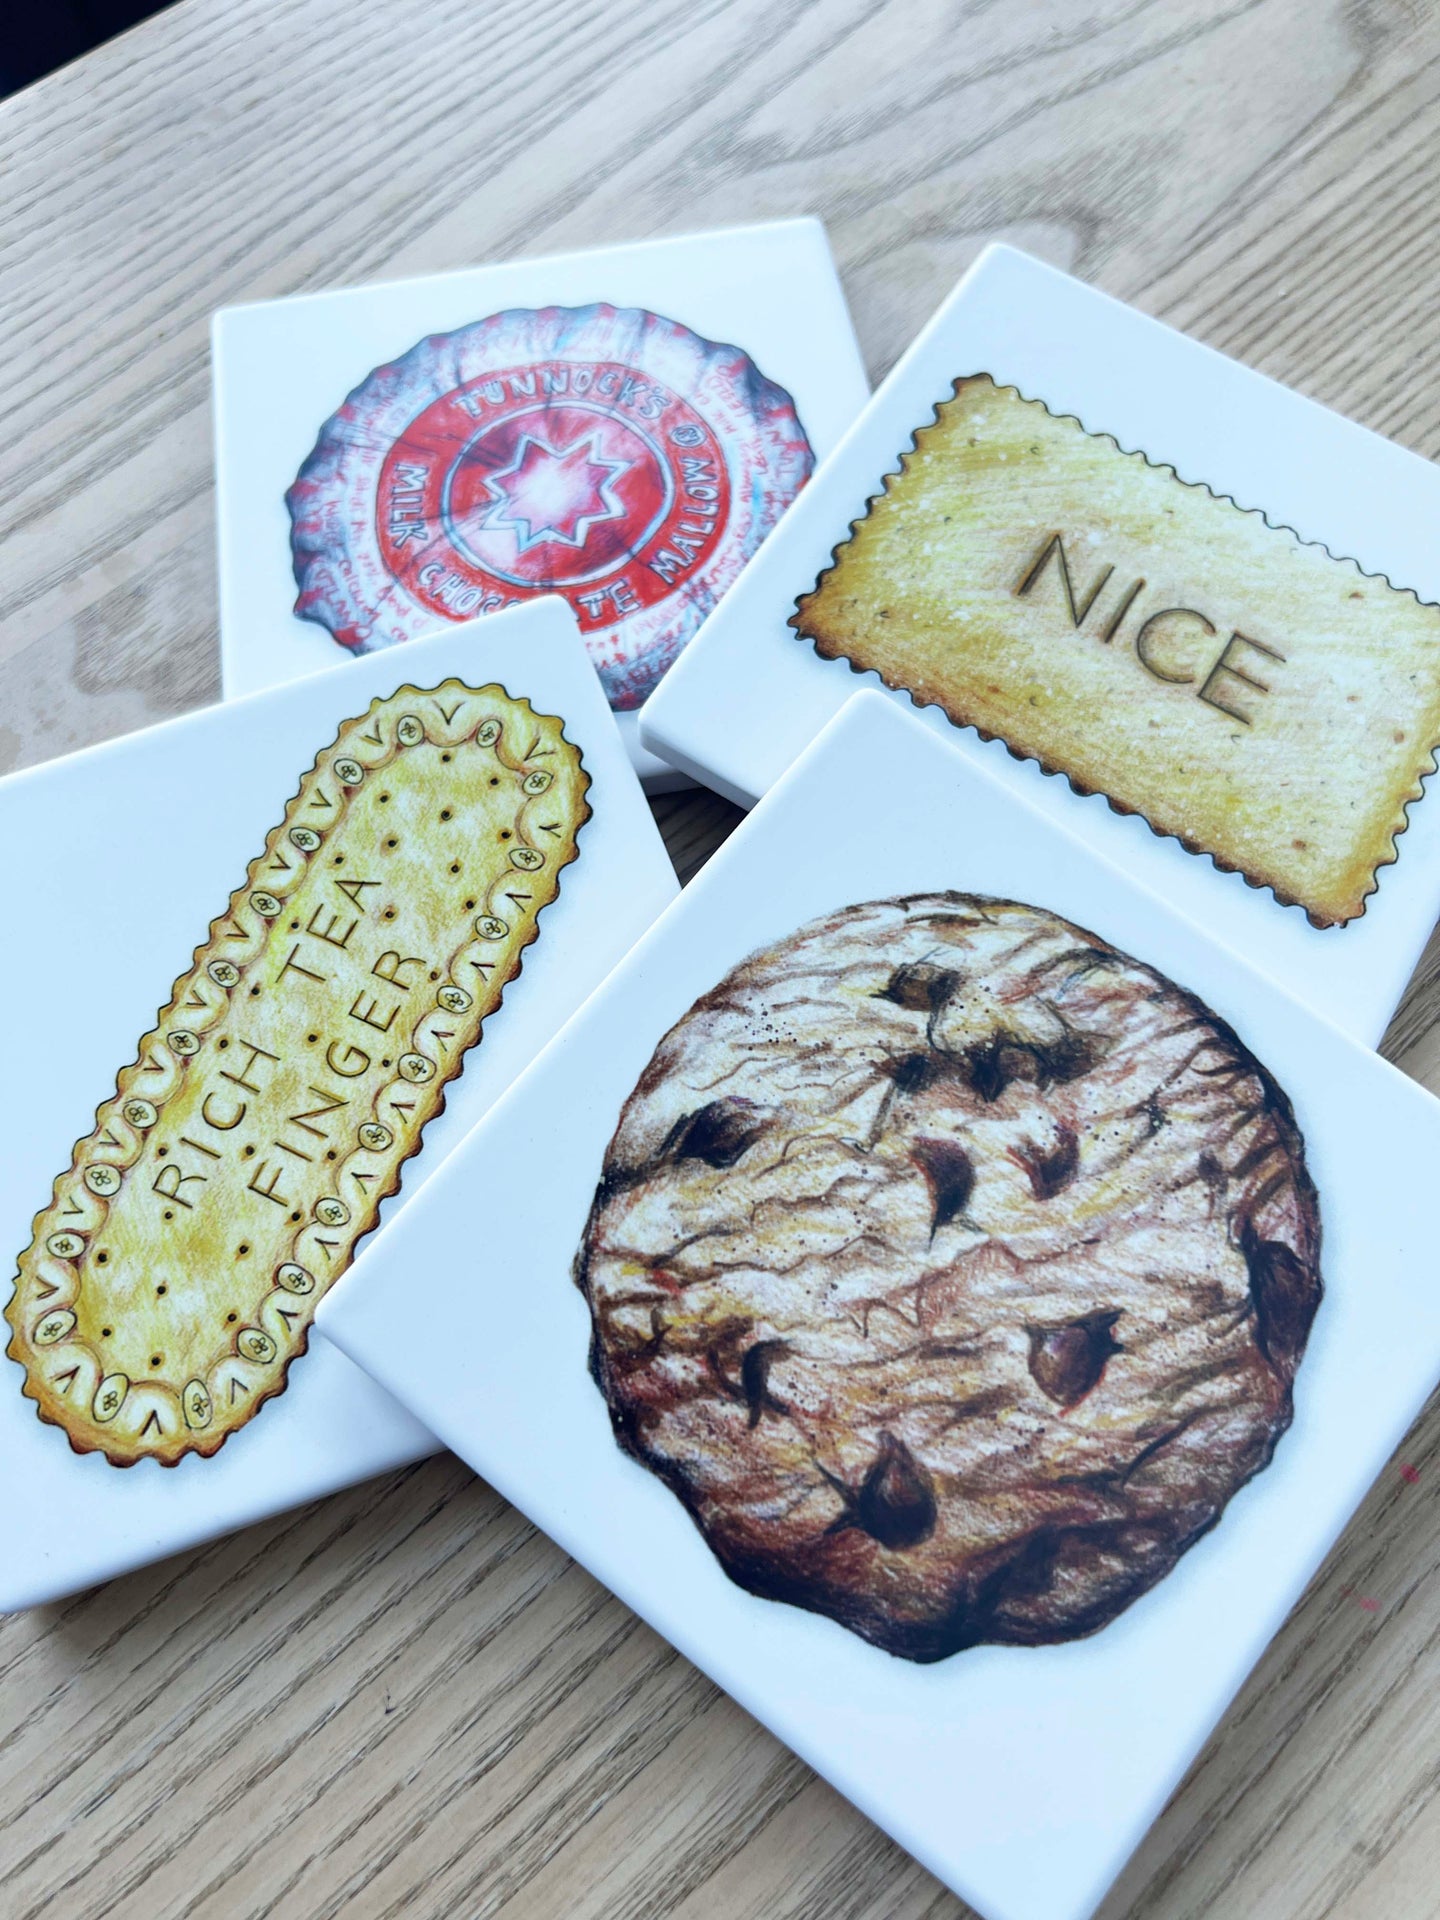 Luxury Ceramic Biscuit Coasters - Set of Four Lucy Hughes Creations Set one - Cookie / Nice / Rich Tea / Tea Cake 